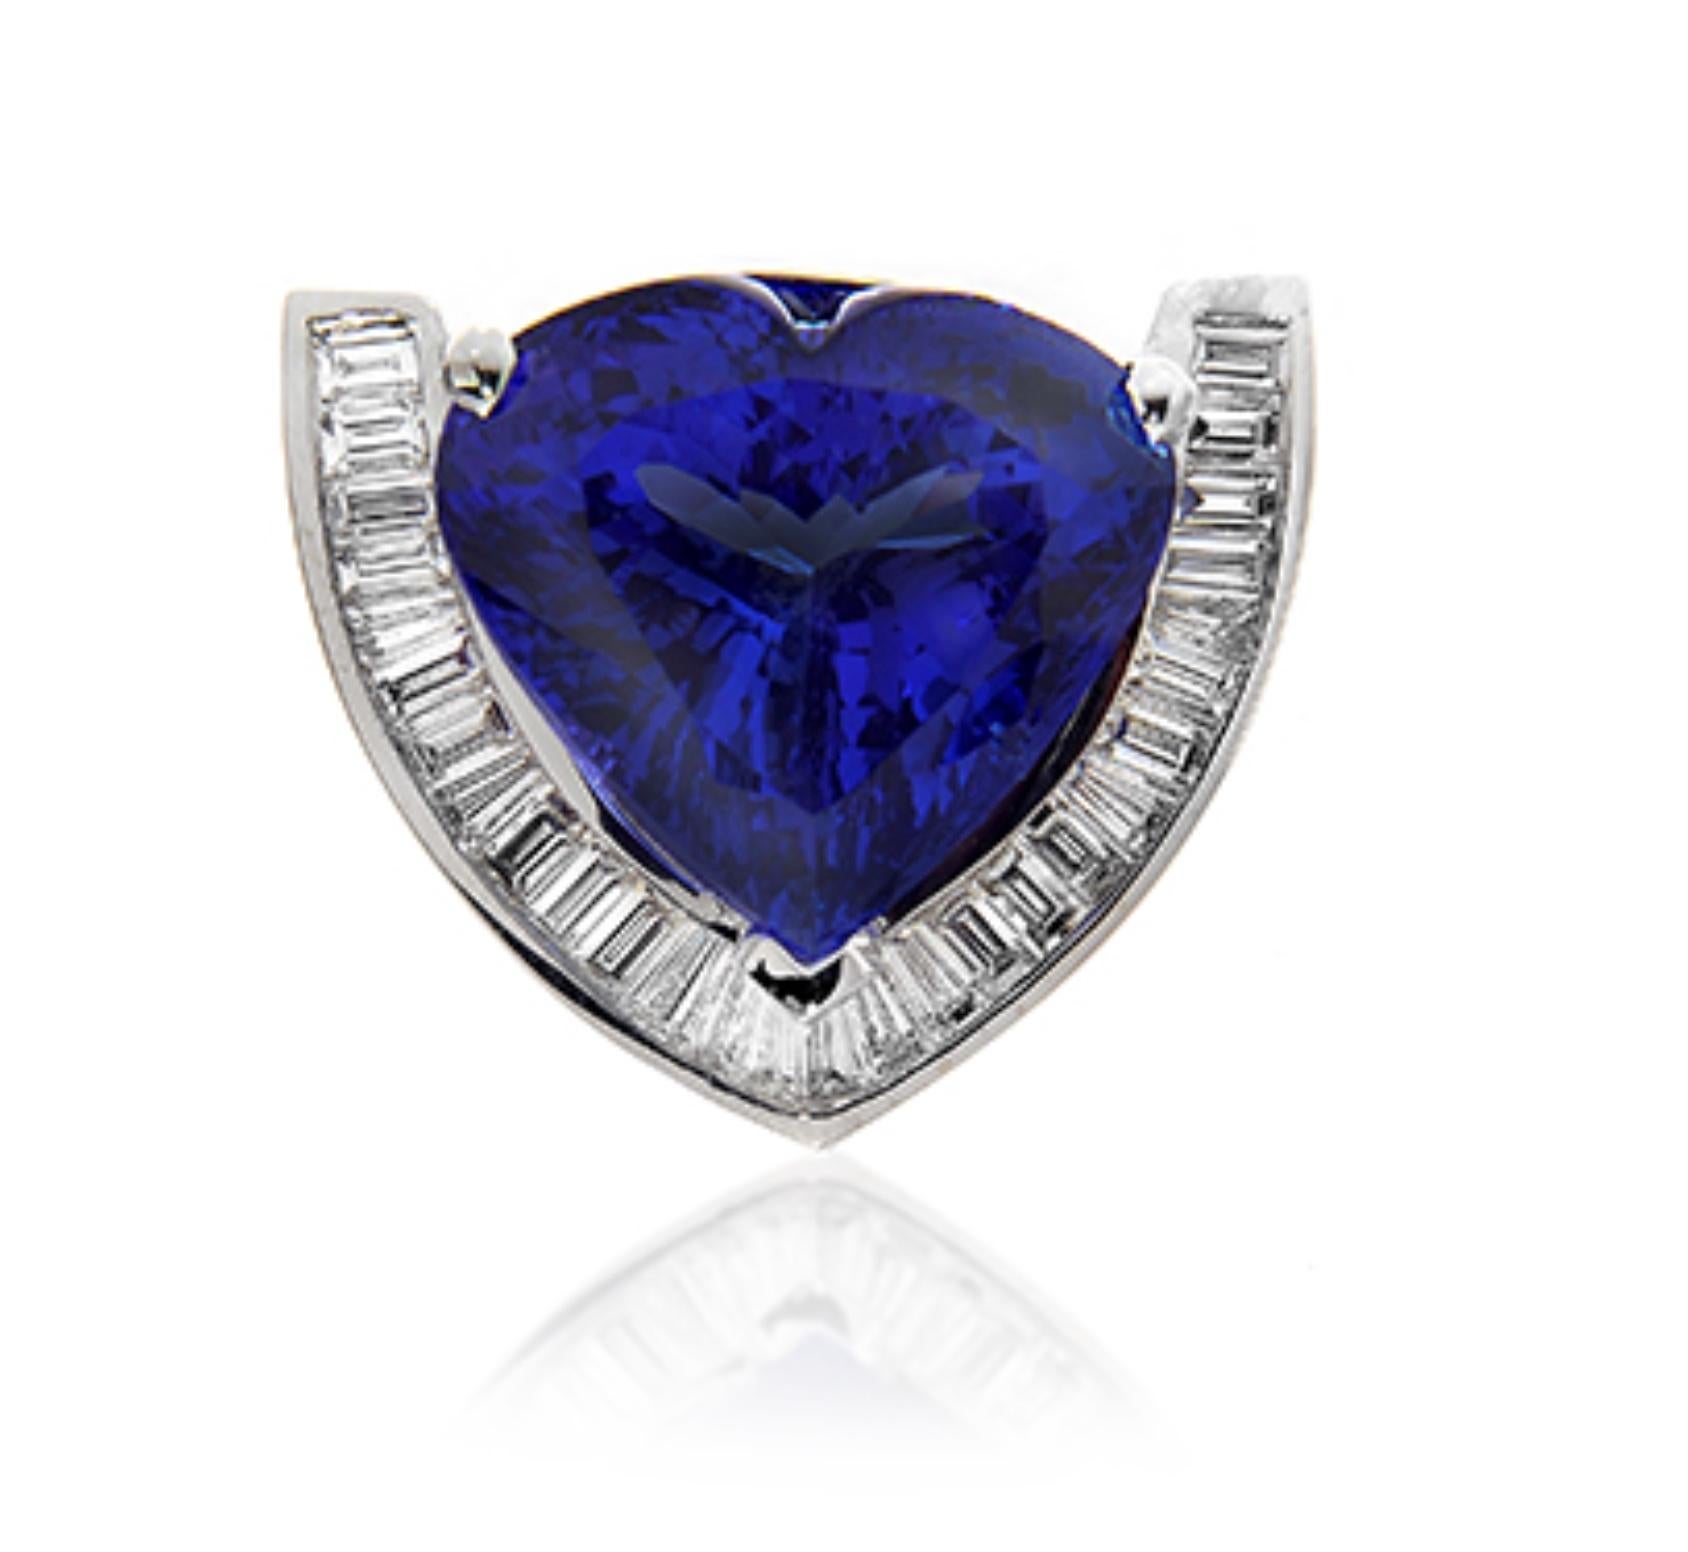 TANZANITE HEART PENDANT
A rich and glowing heart shape Tanzanite is cradled by a striking channel of baguettes.
Item:	# 01603
Metal:	18k W
Color Weight:	25.33 ct.
Diamond Weight:	1.90 ct.
